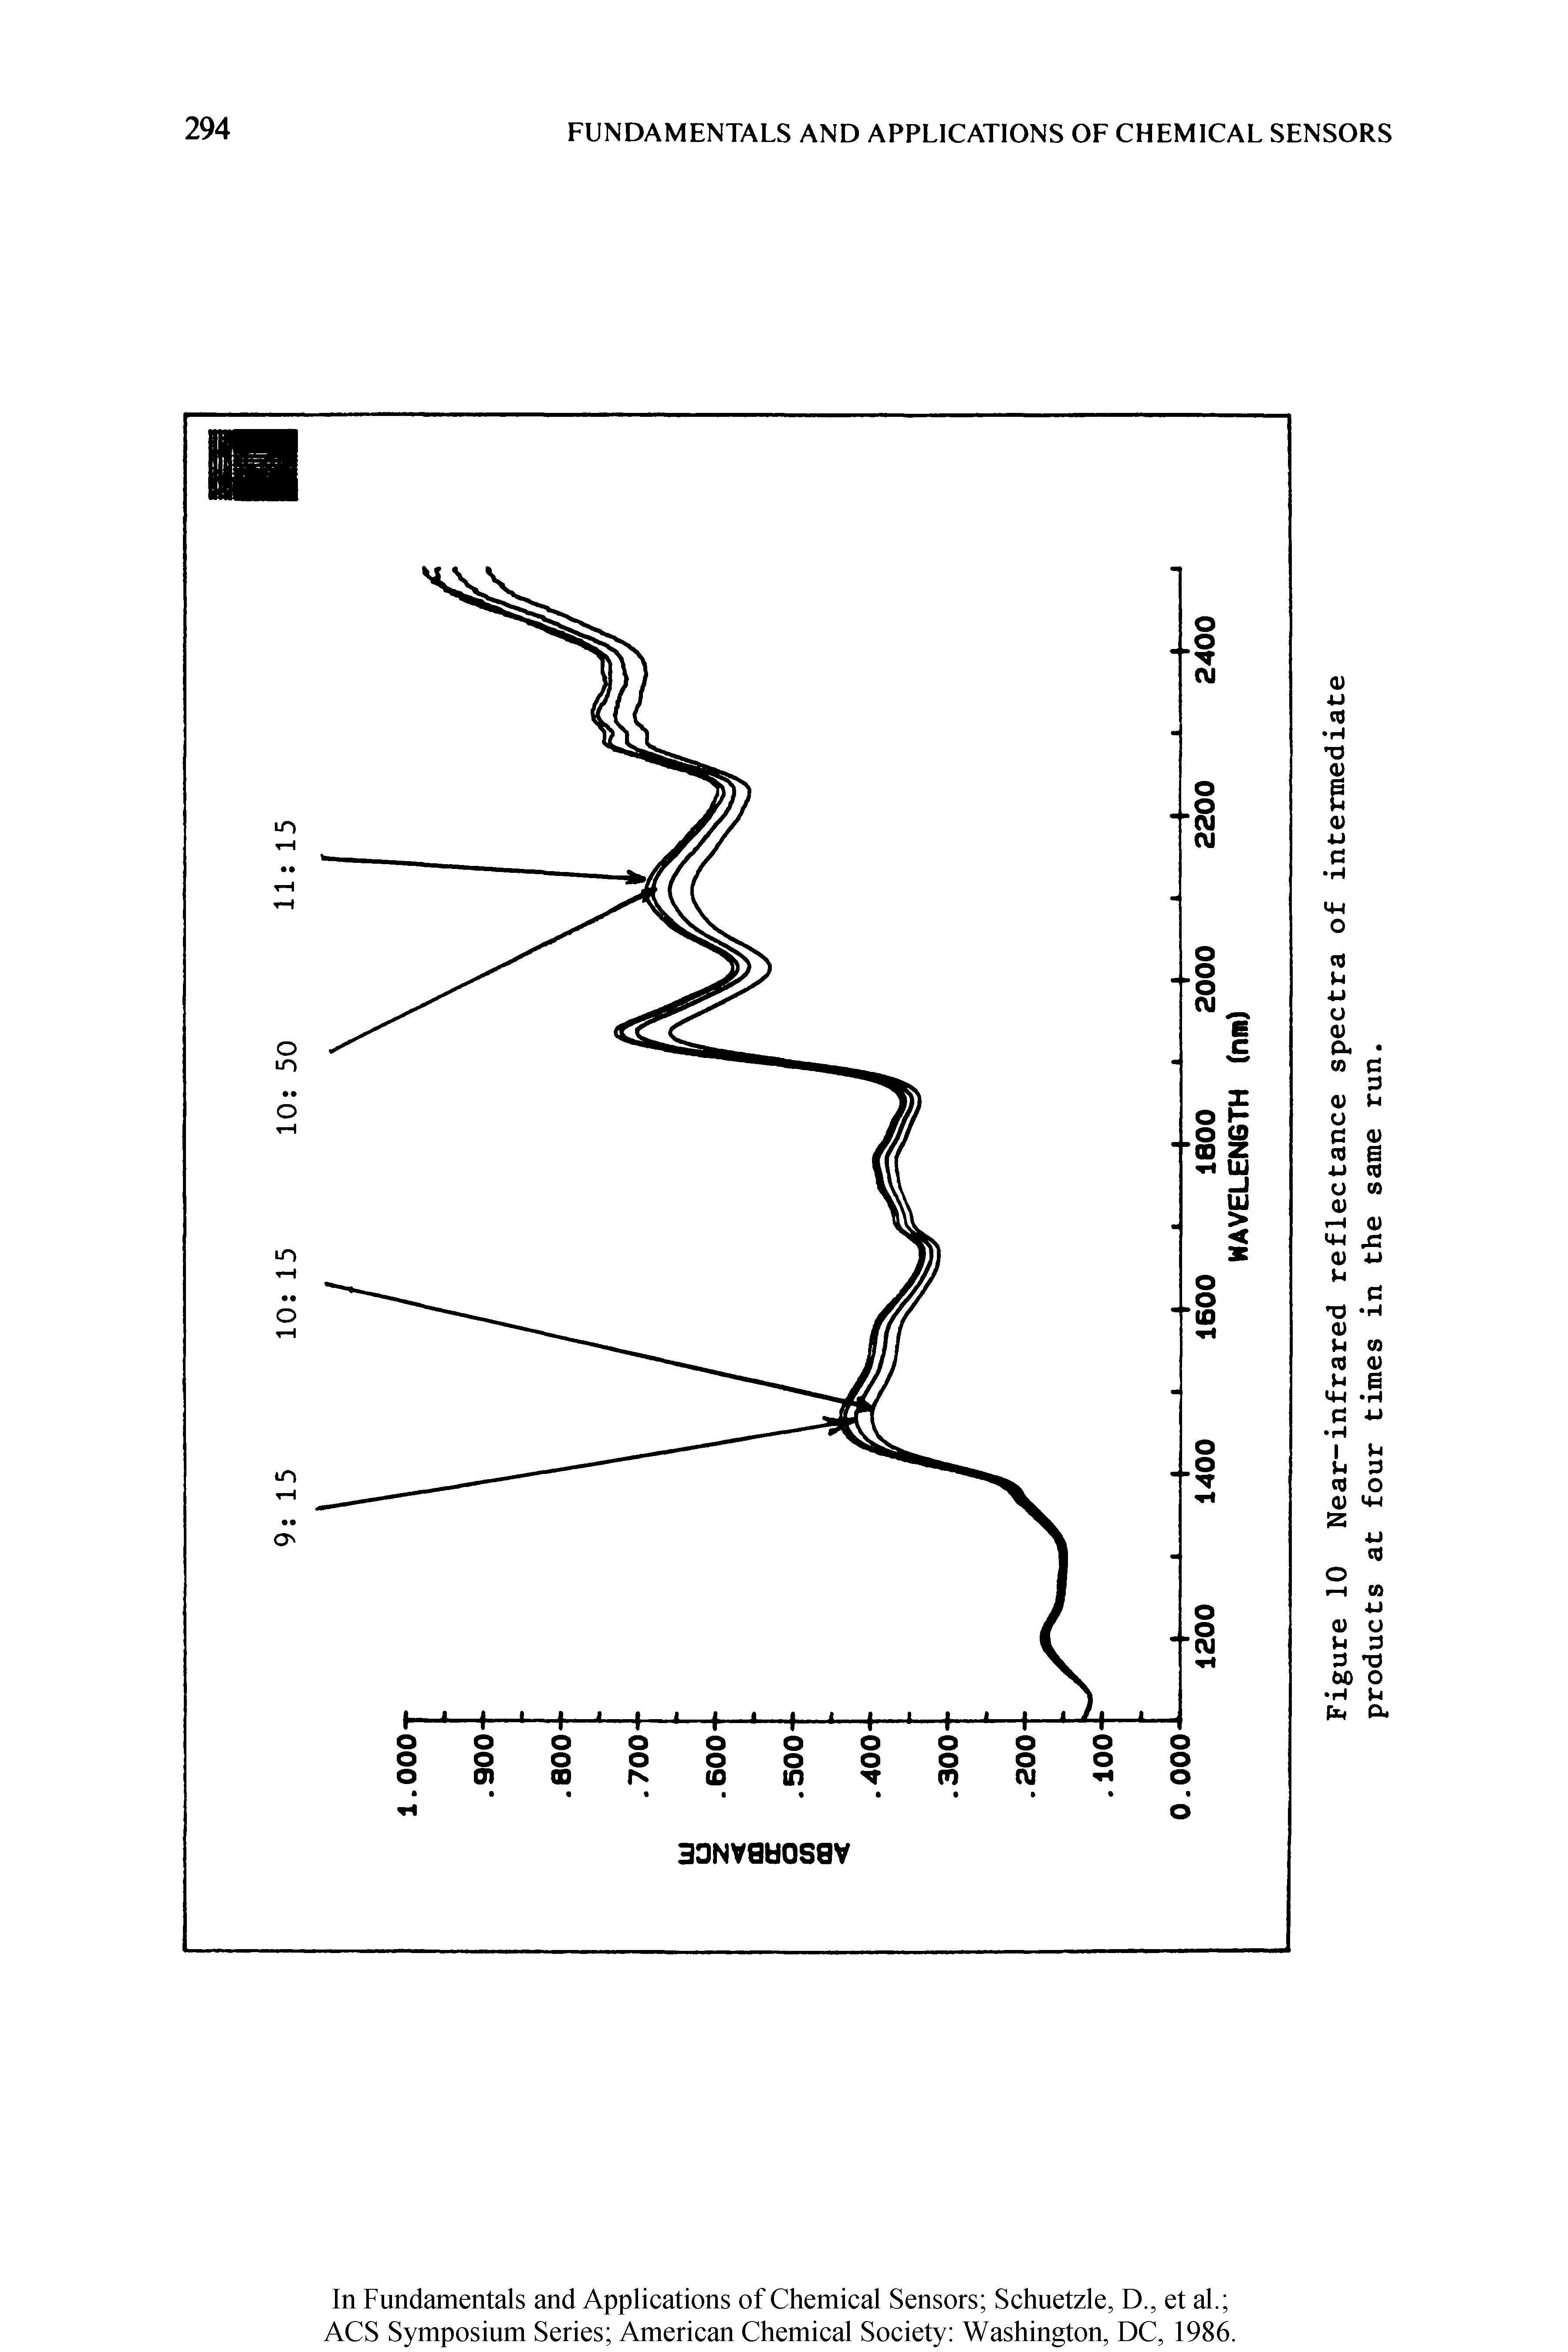 Figure 10 Near-infrared reflectance spectra of intermediate products at four times in the same run.